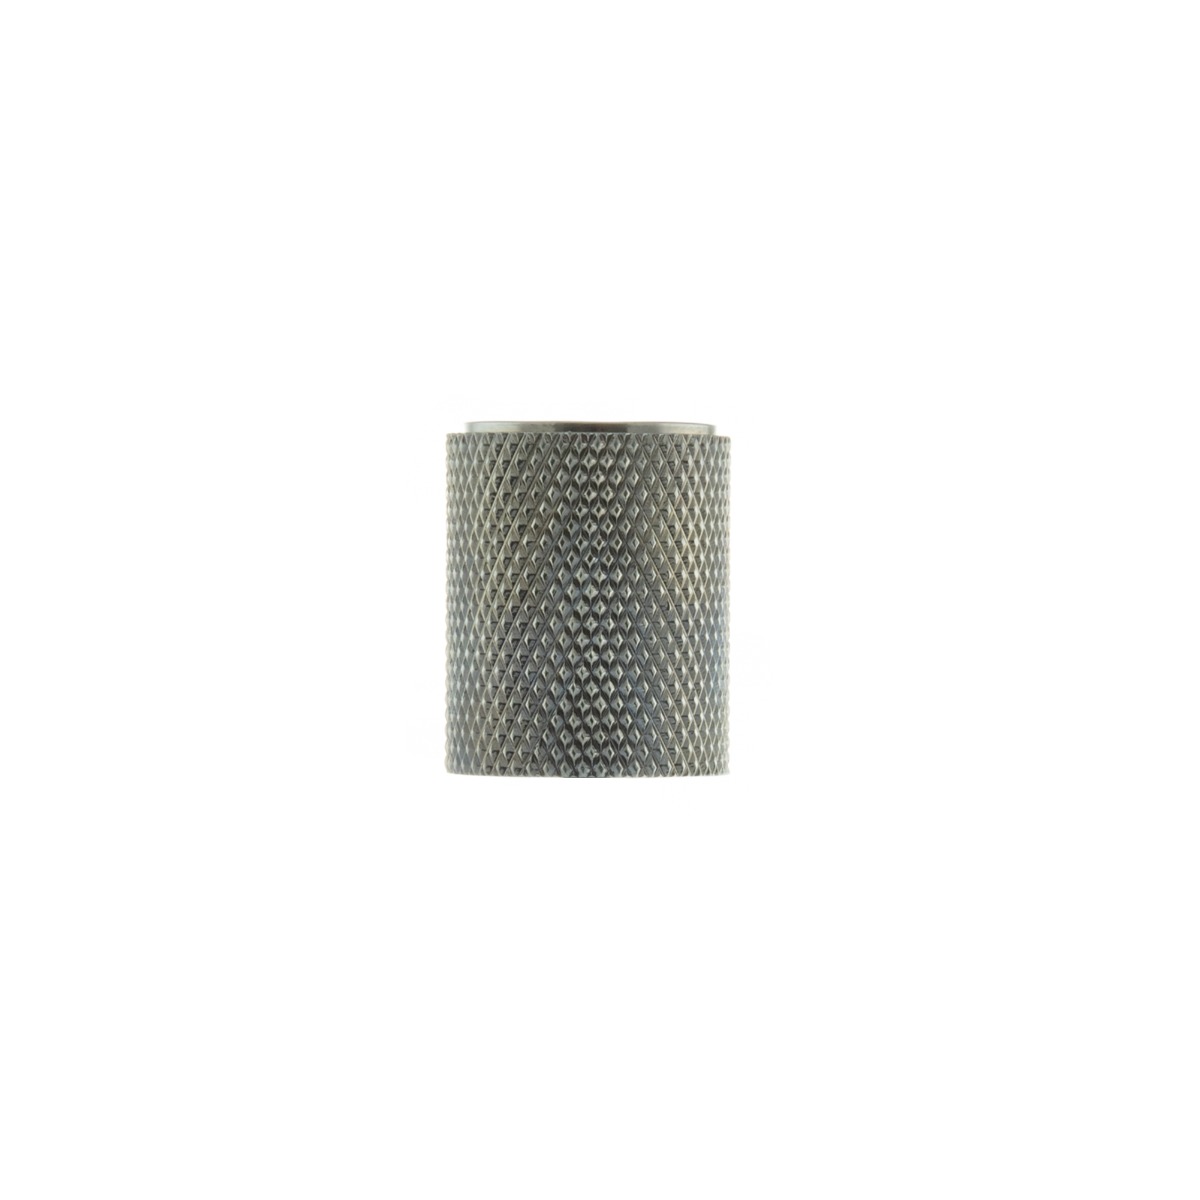 Millhouse Brass Watson Cylinder Knurled Cabinet Knob on Concealed Fix - Polished Chrome MHCK1820PC